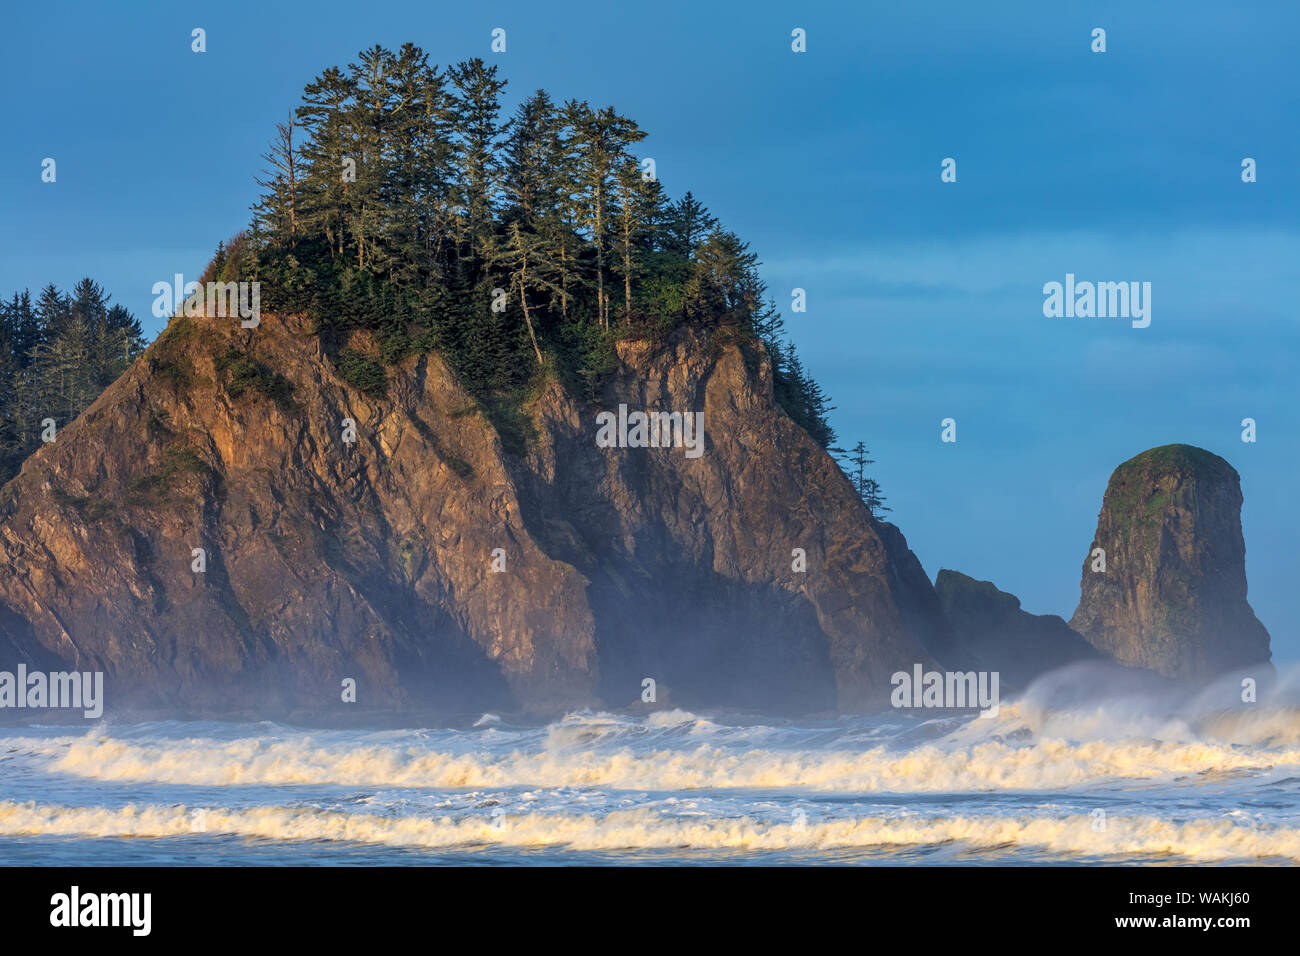 Sea stacks and waves at first light on Rialto Beach in Olympic National Park, Washington State, USA Stock Photo